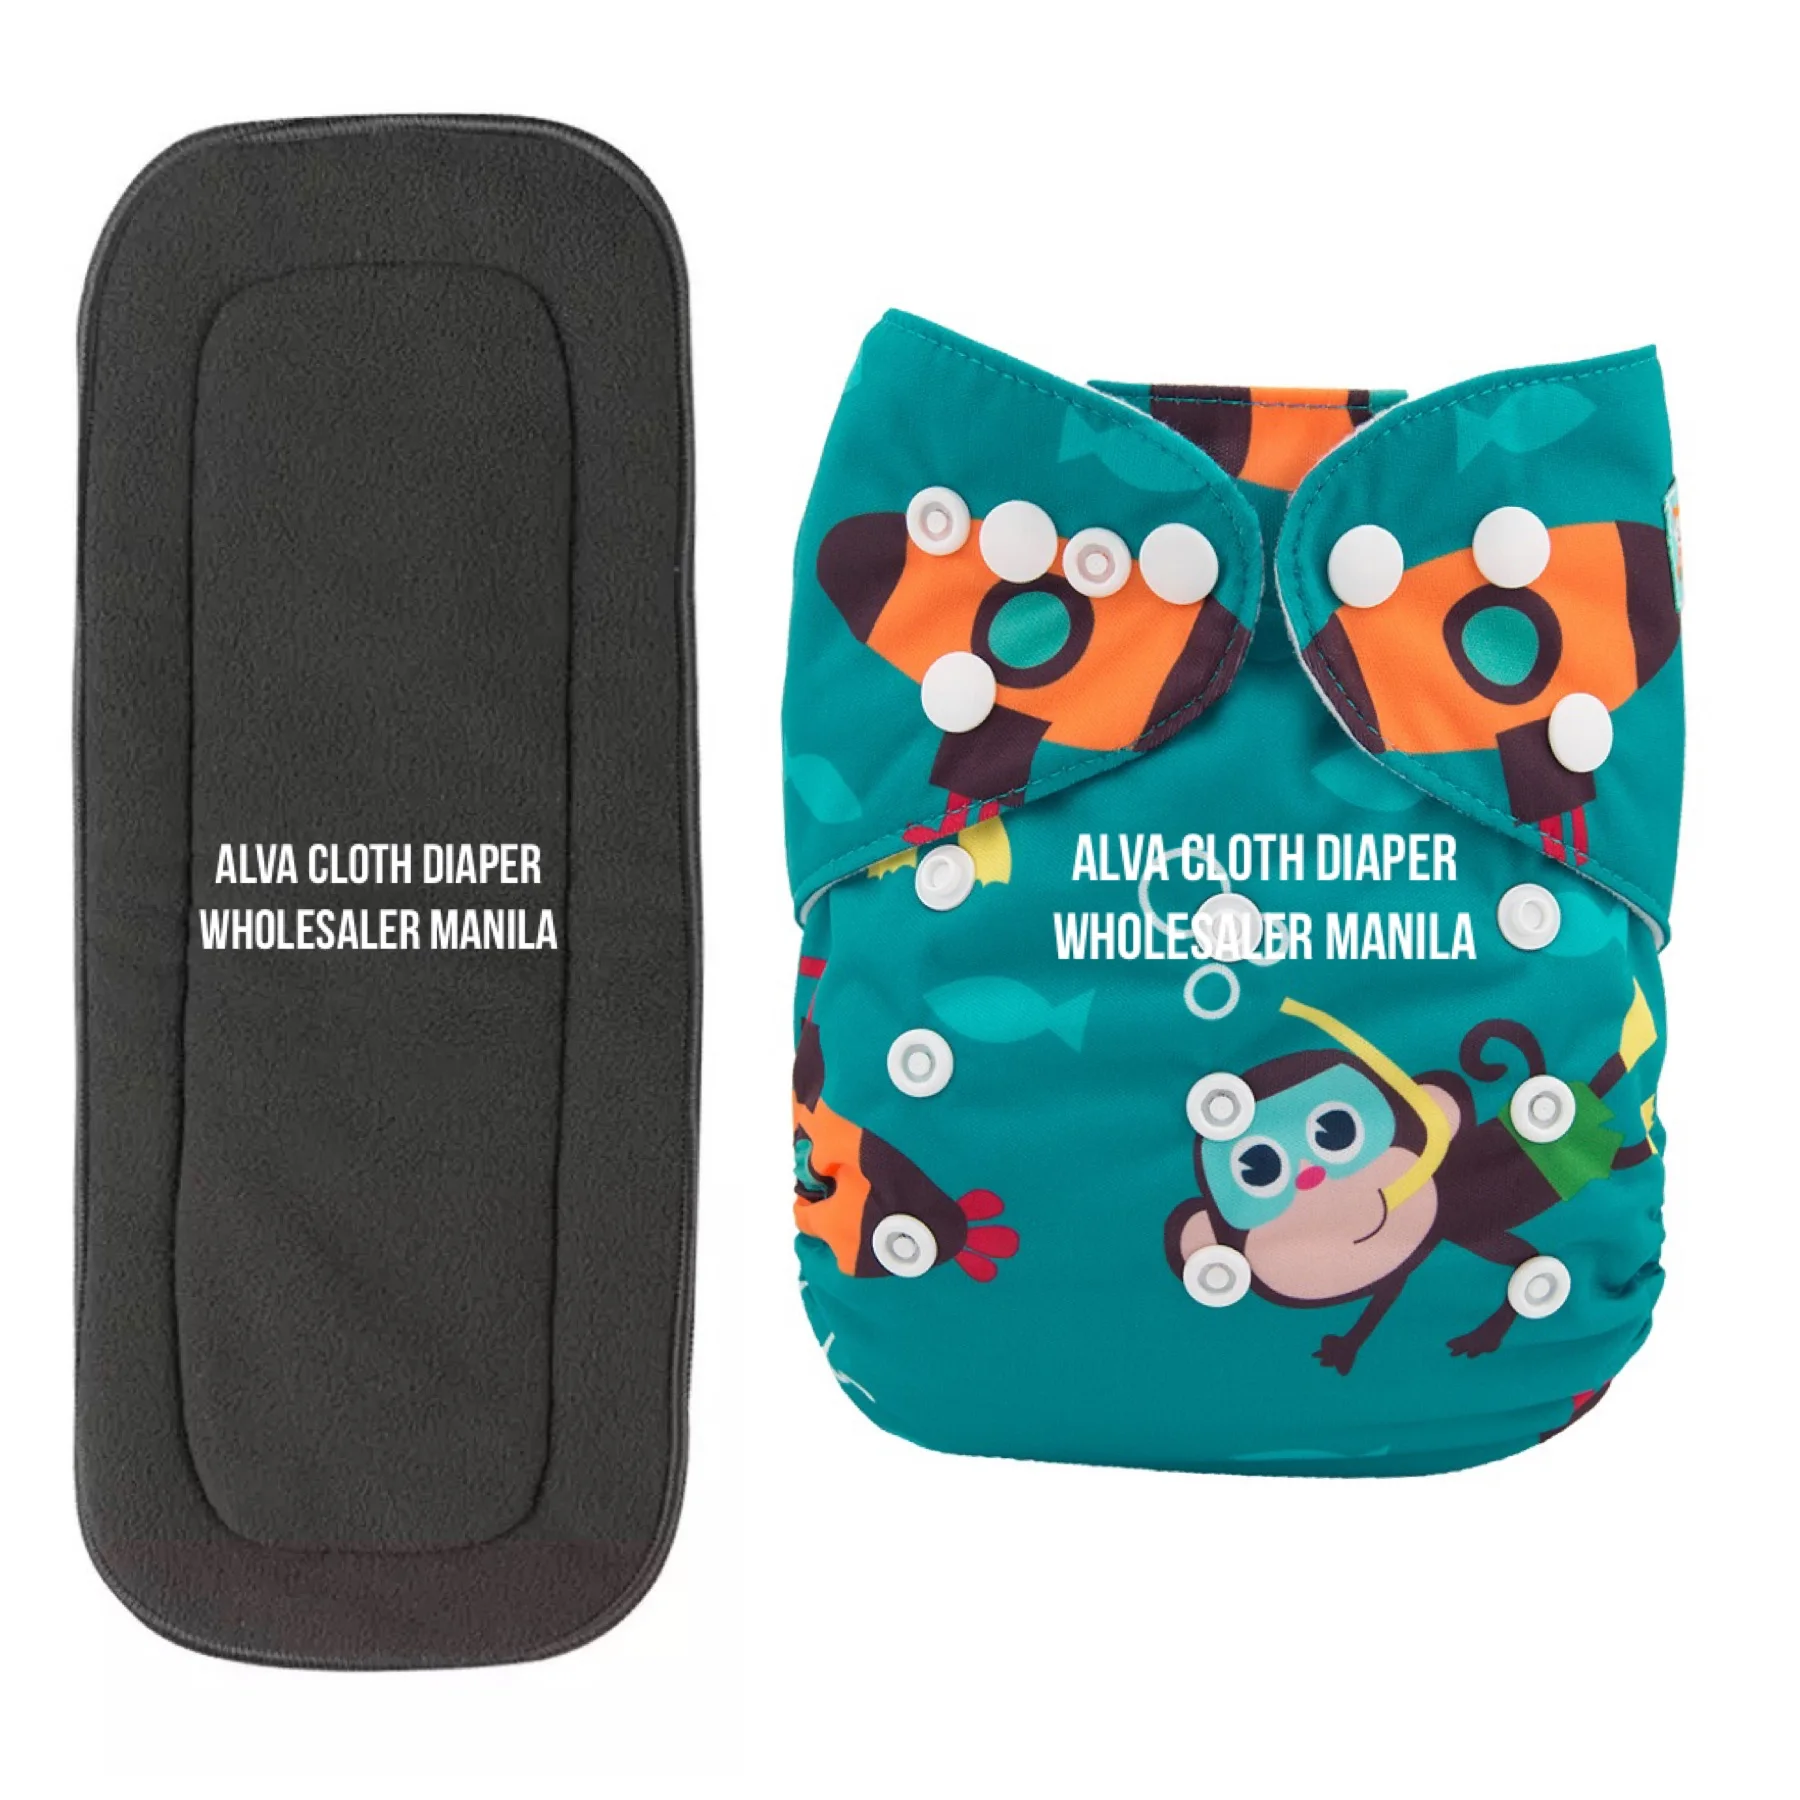 ✅1 Alva Washable Cloth Diapers ✅1 Bamboo Charcoal Insert 5-Layer Dinosaur